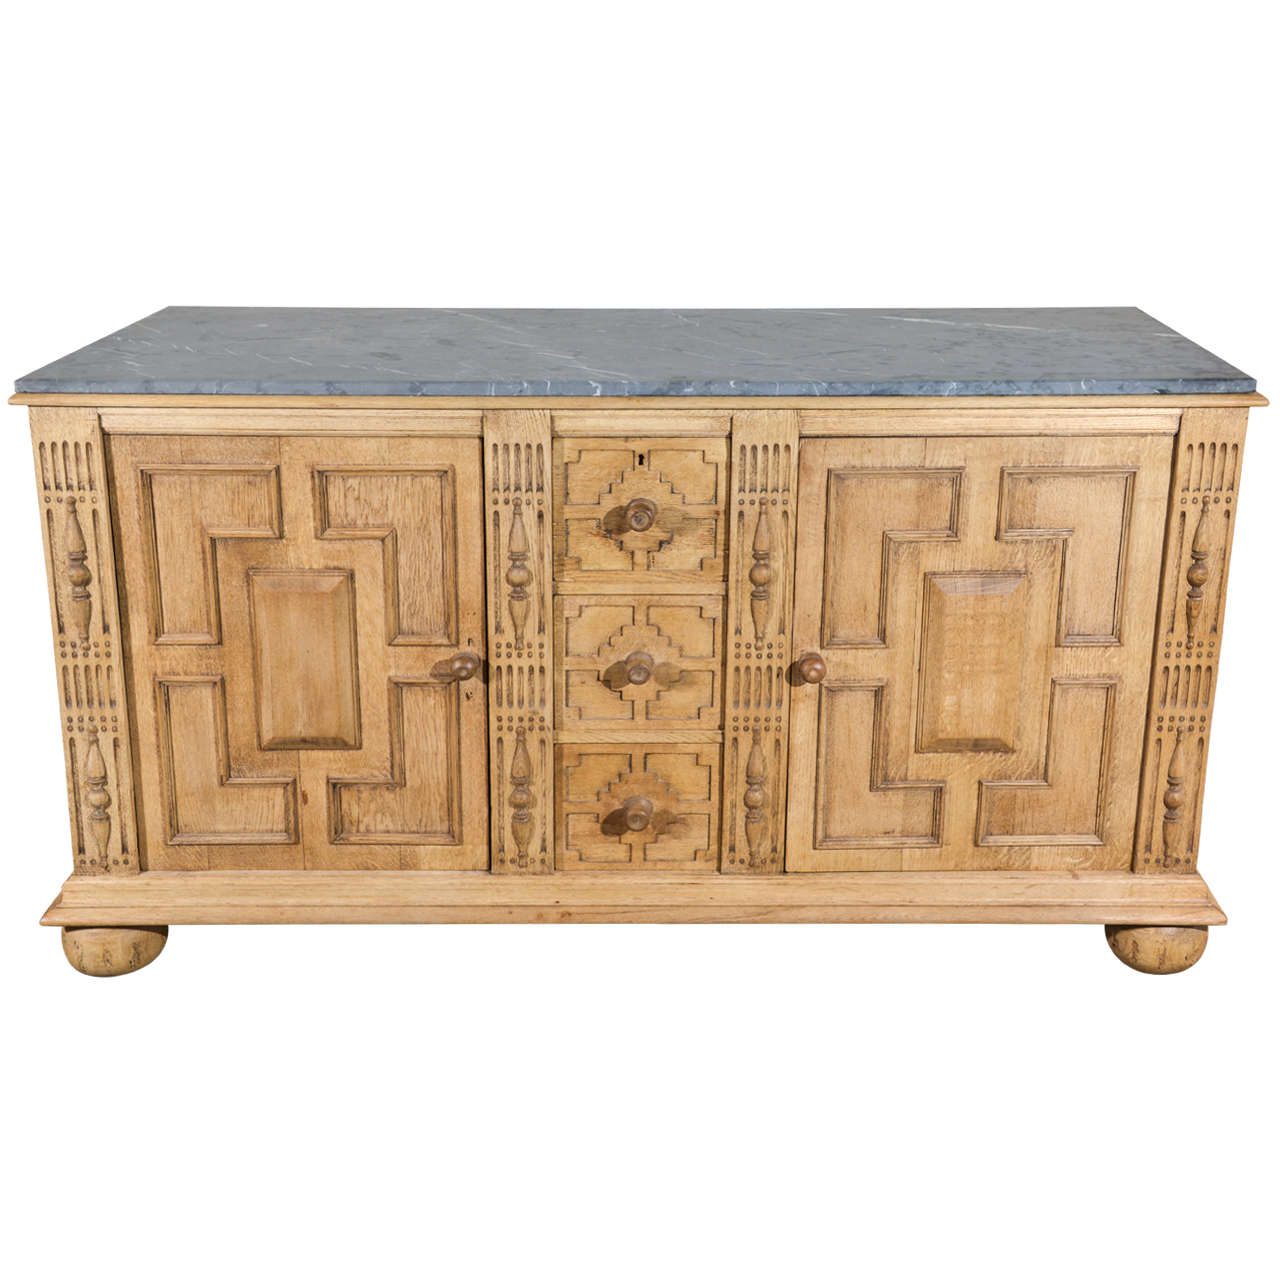 Antique English Server in Bleached Oak with Stone Top